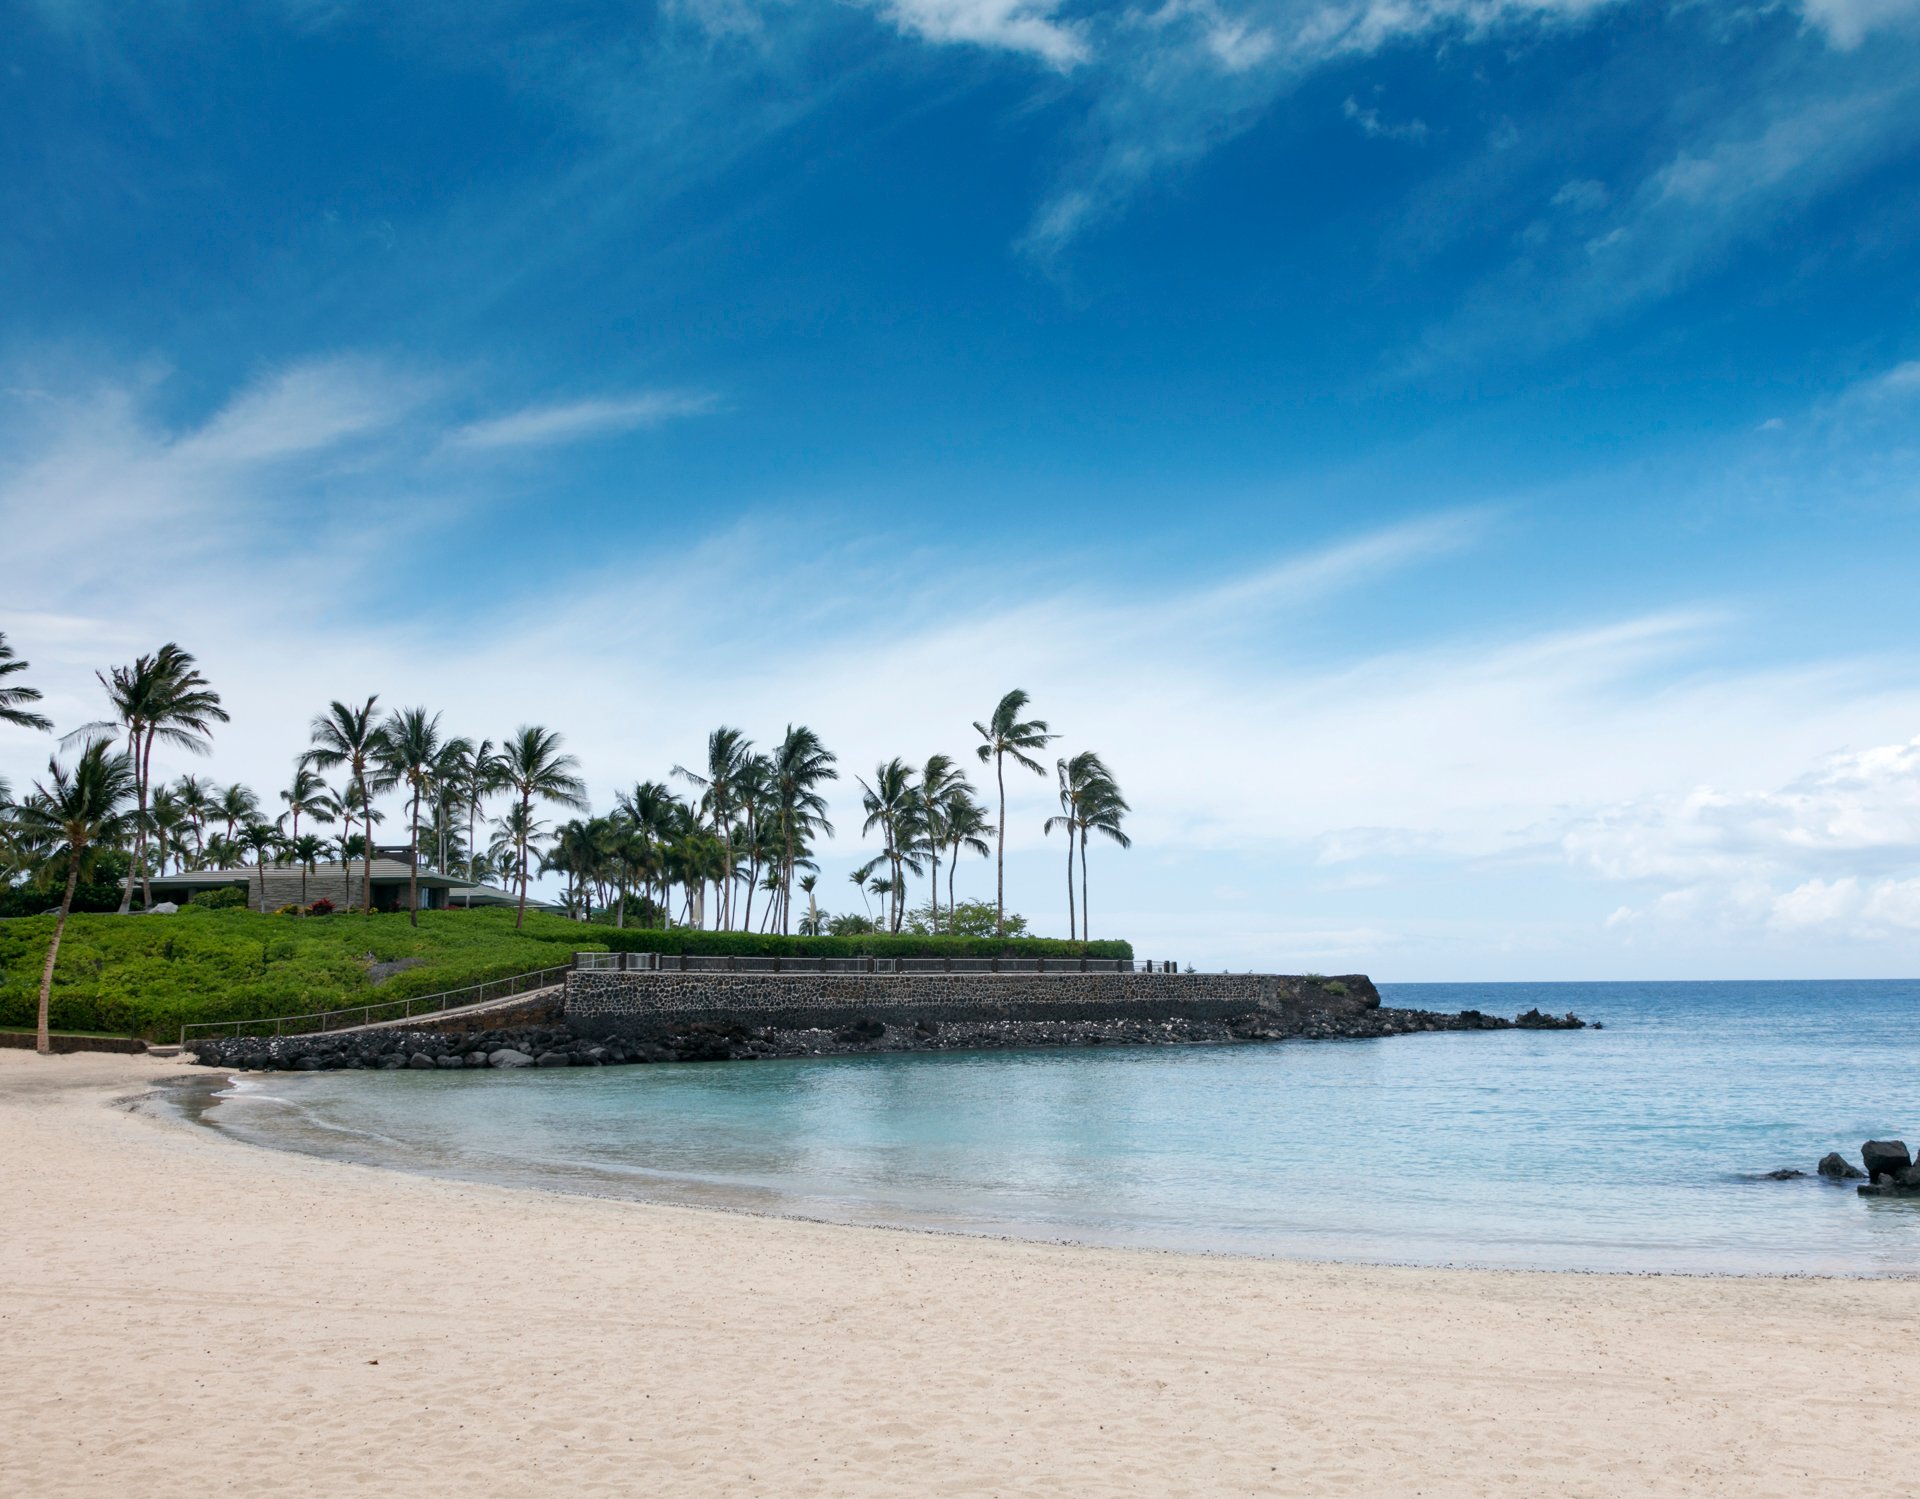 Enjoy a day at the Private Mauna Lani Beach Club. Free pass included!